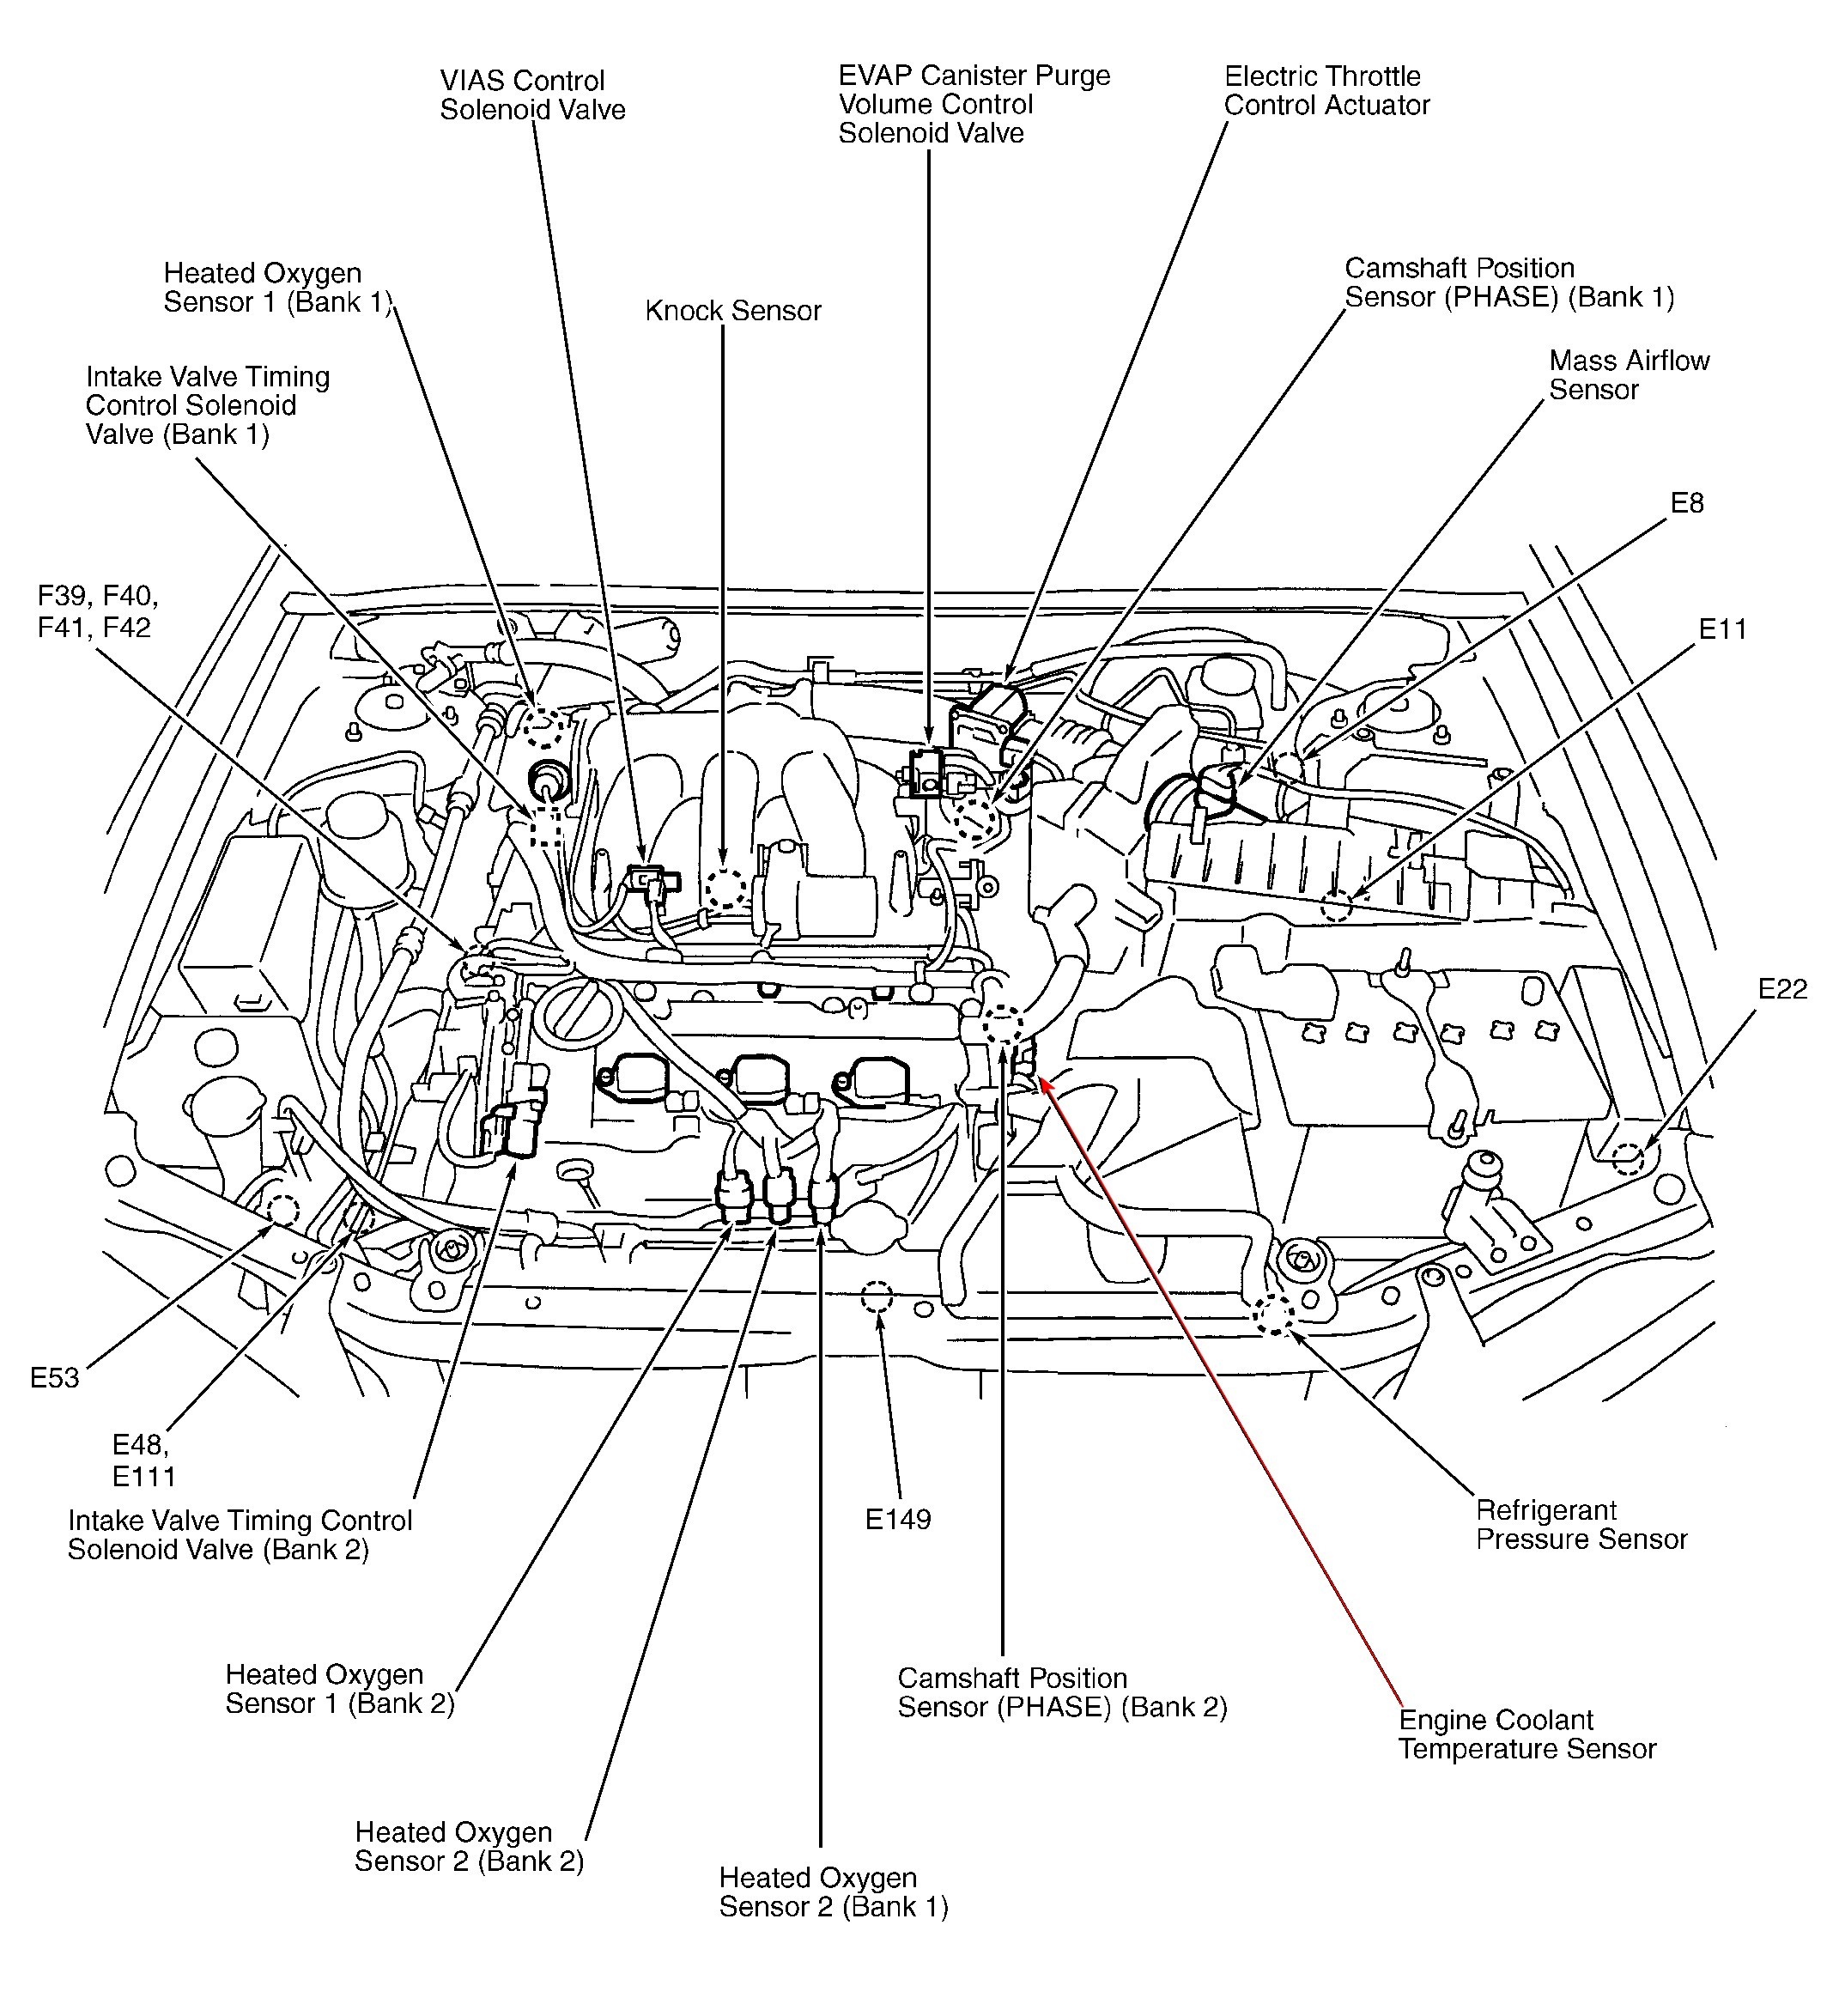 Diagram Of Cooling System for Engine 2005 Nissan Pathfinder Engine Diagram Wiring Diagram Paper Of Diagram Of Cooling System for Engine